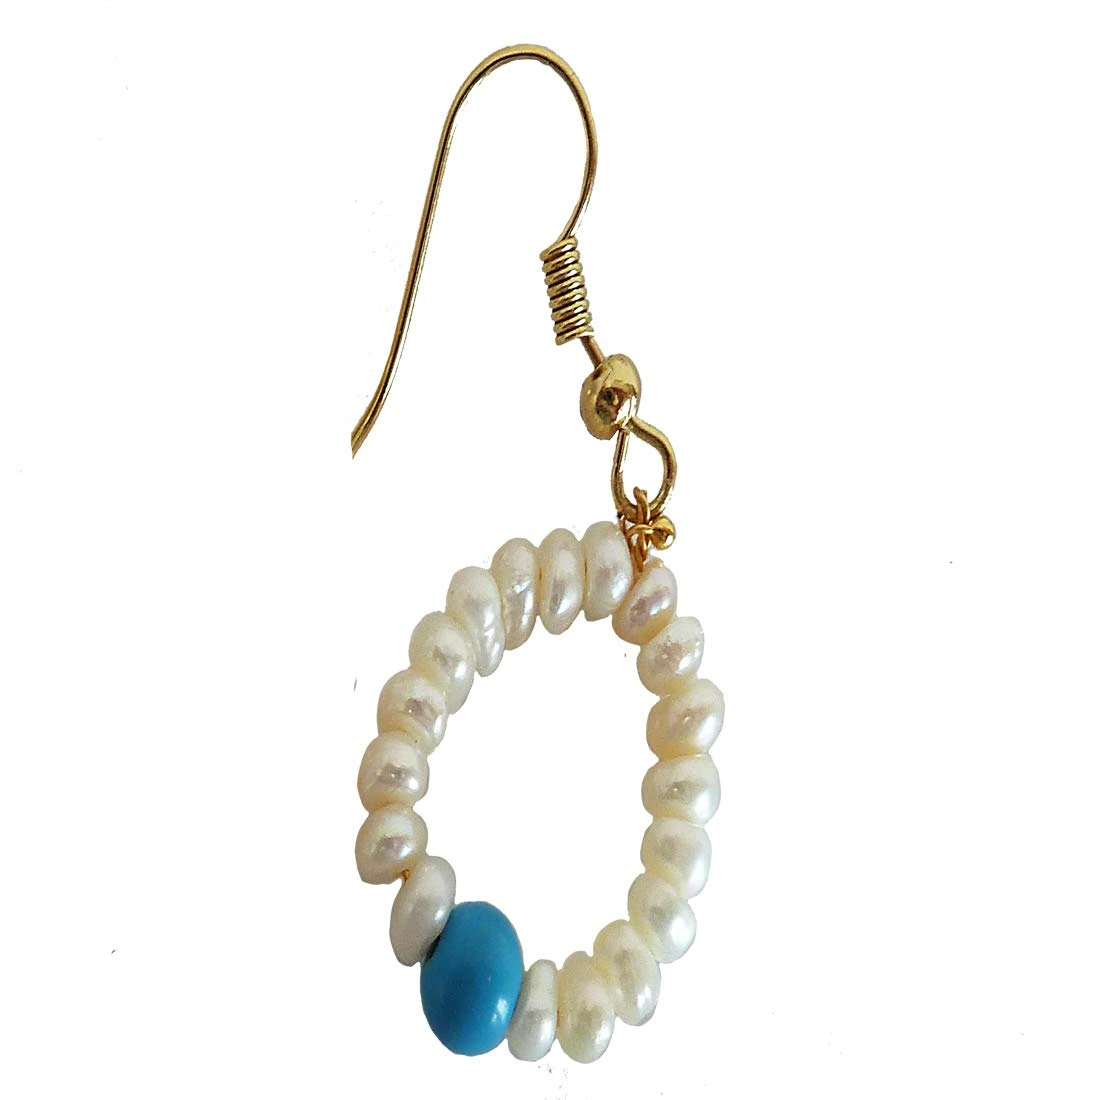 Dangling Circular Turquoise Beads, Freshwater Pearl and Gold Plated Wire Style Earrings (SE383)